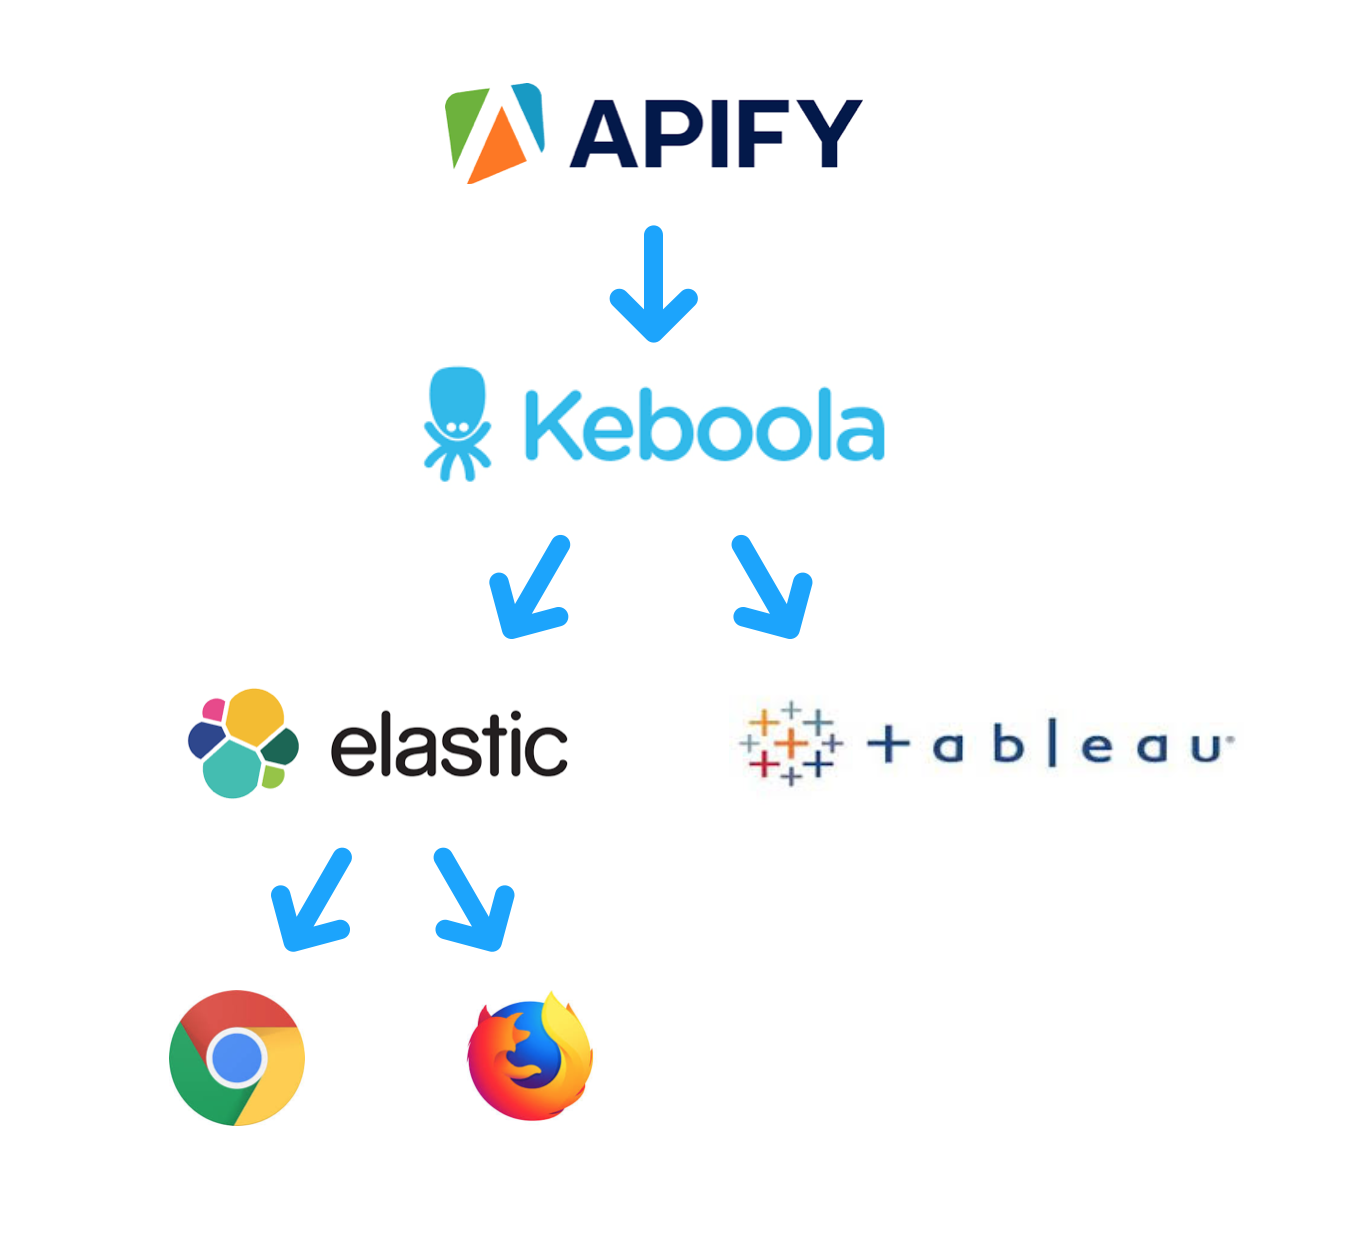 a tree diagram showing the system structure of Hlídač Shopů: Apify pointing at Keboola, which is divided into tableau and elastic, which further leads to Chrome and Firefox